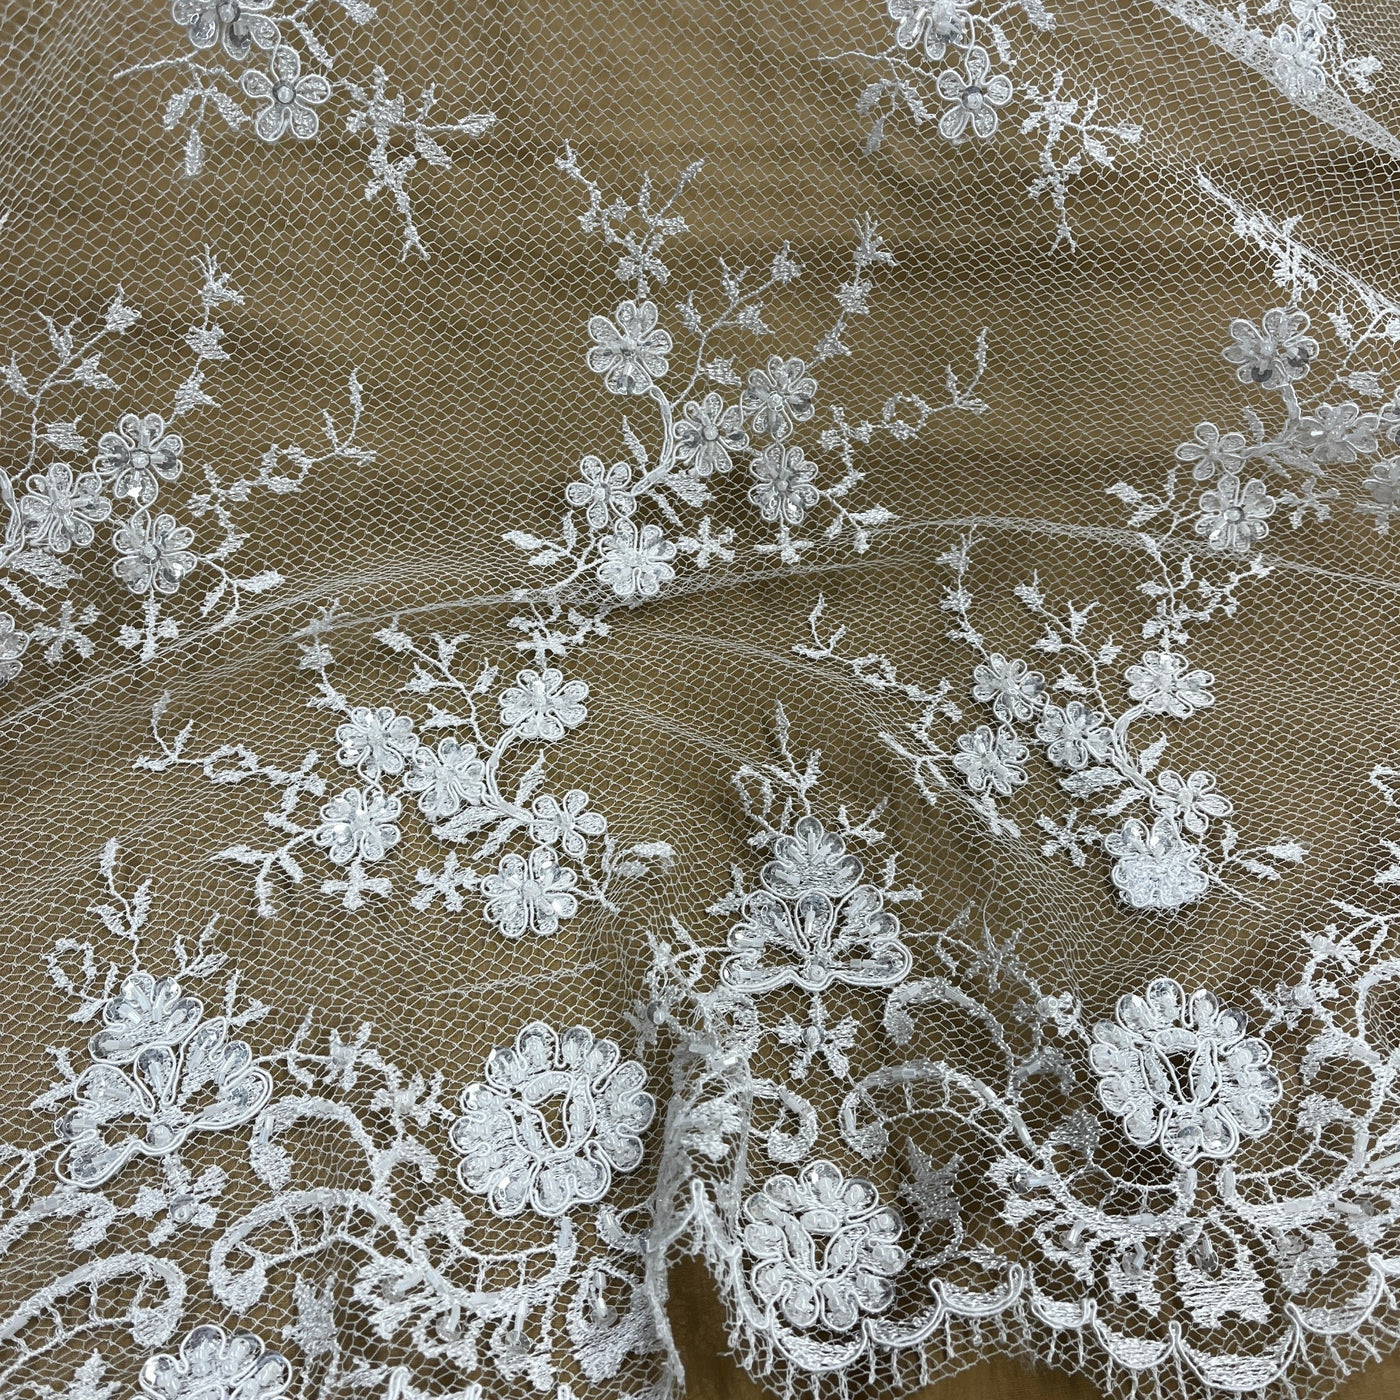 Beaded Lace Fabric Embroidered on 100% Polyester Net Mesh | Lace USA - 96731W-BP White